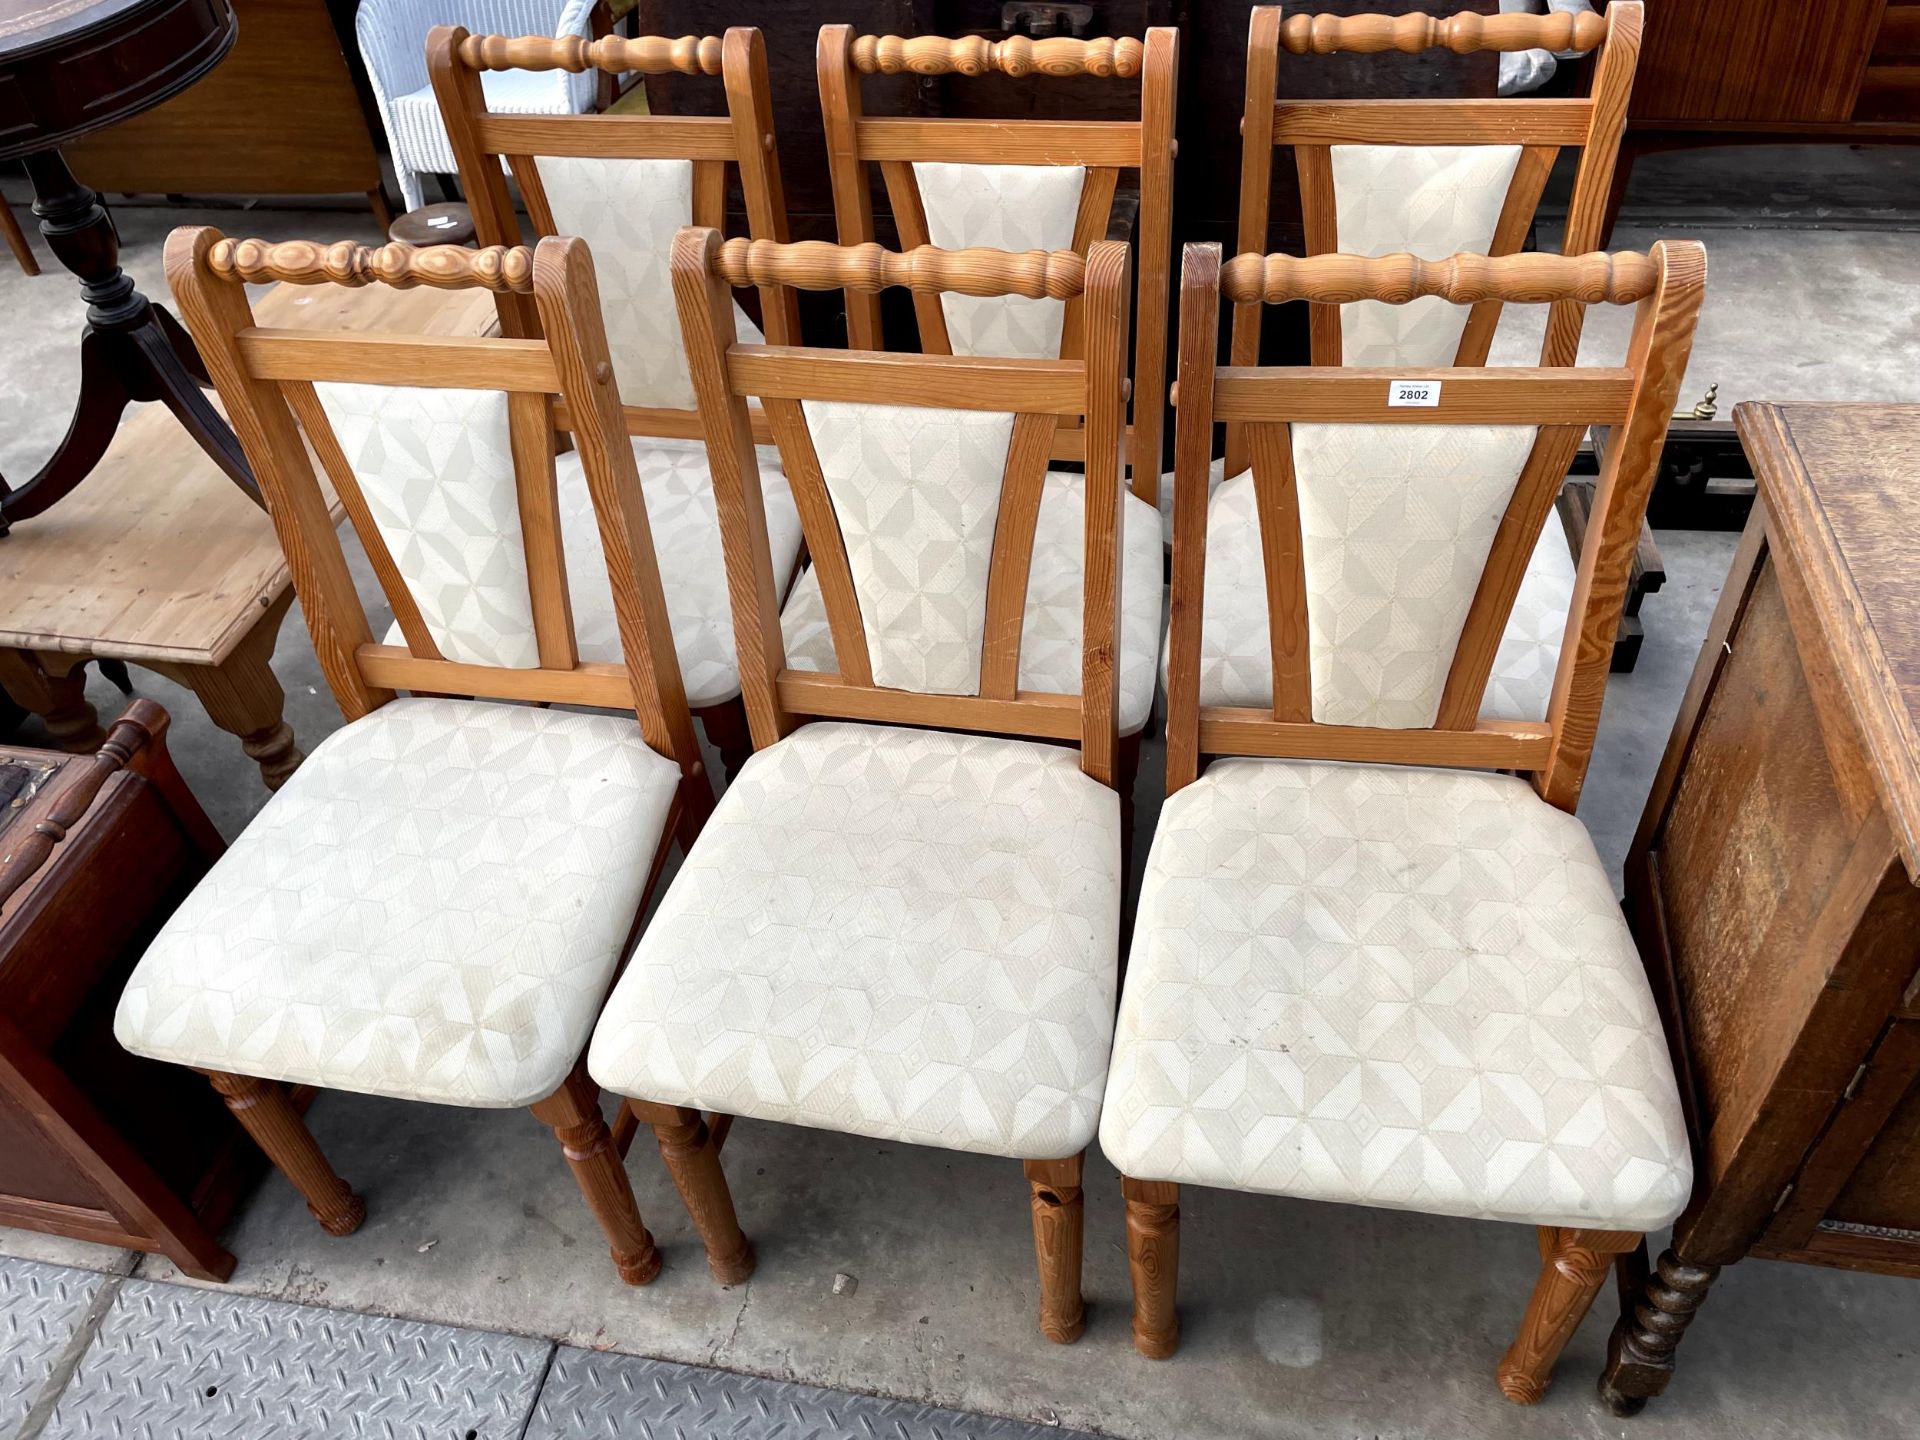 A SET OF FOUR MODERN PINE DINING CHAIRS WITH UPHOLSTERED SEATS AND BACKS